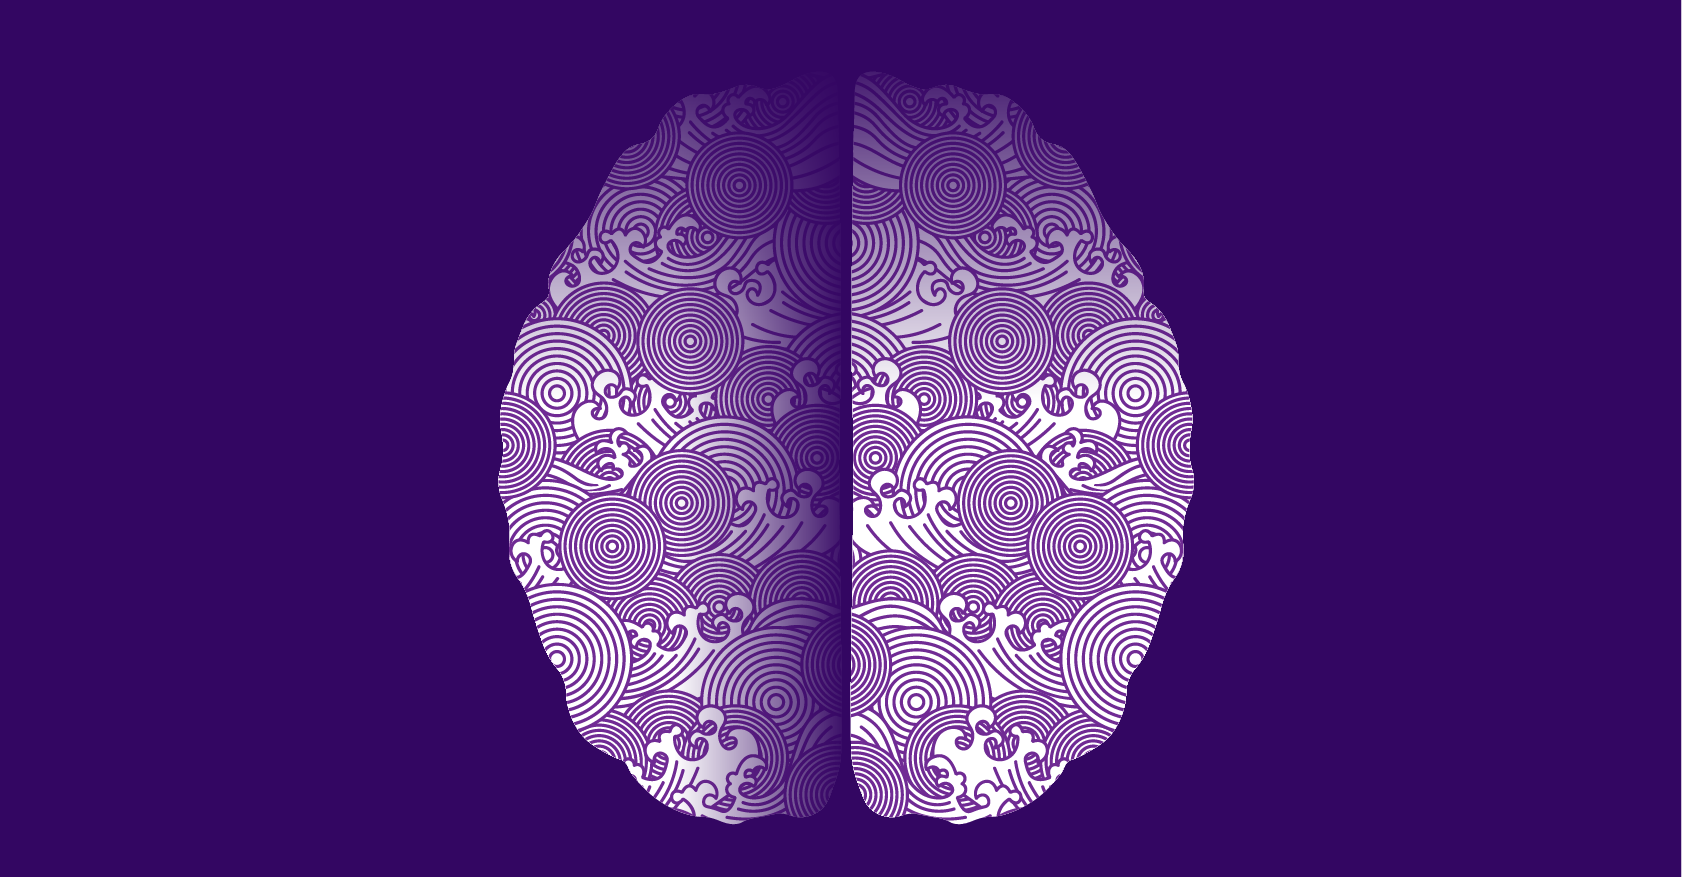 Purple illustration of a brain with decorative elements fading to abstractly represent Alzheimer's